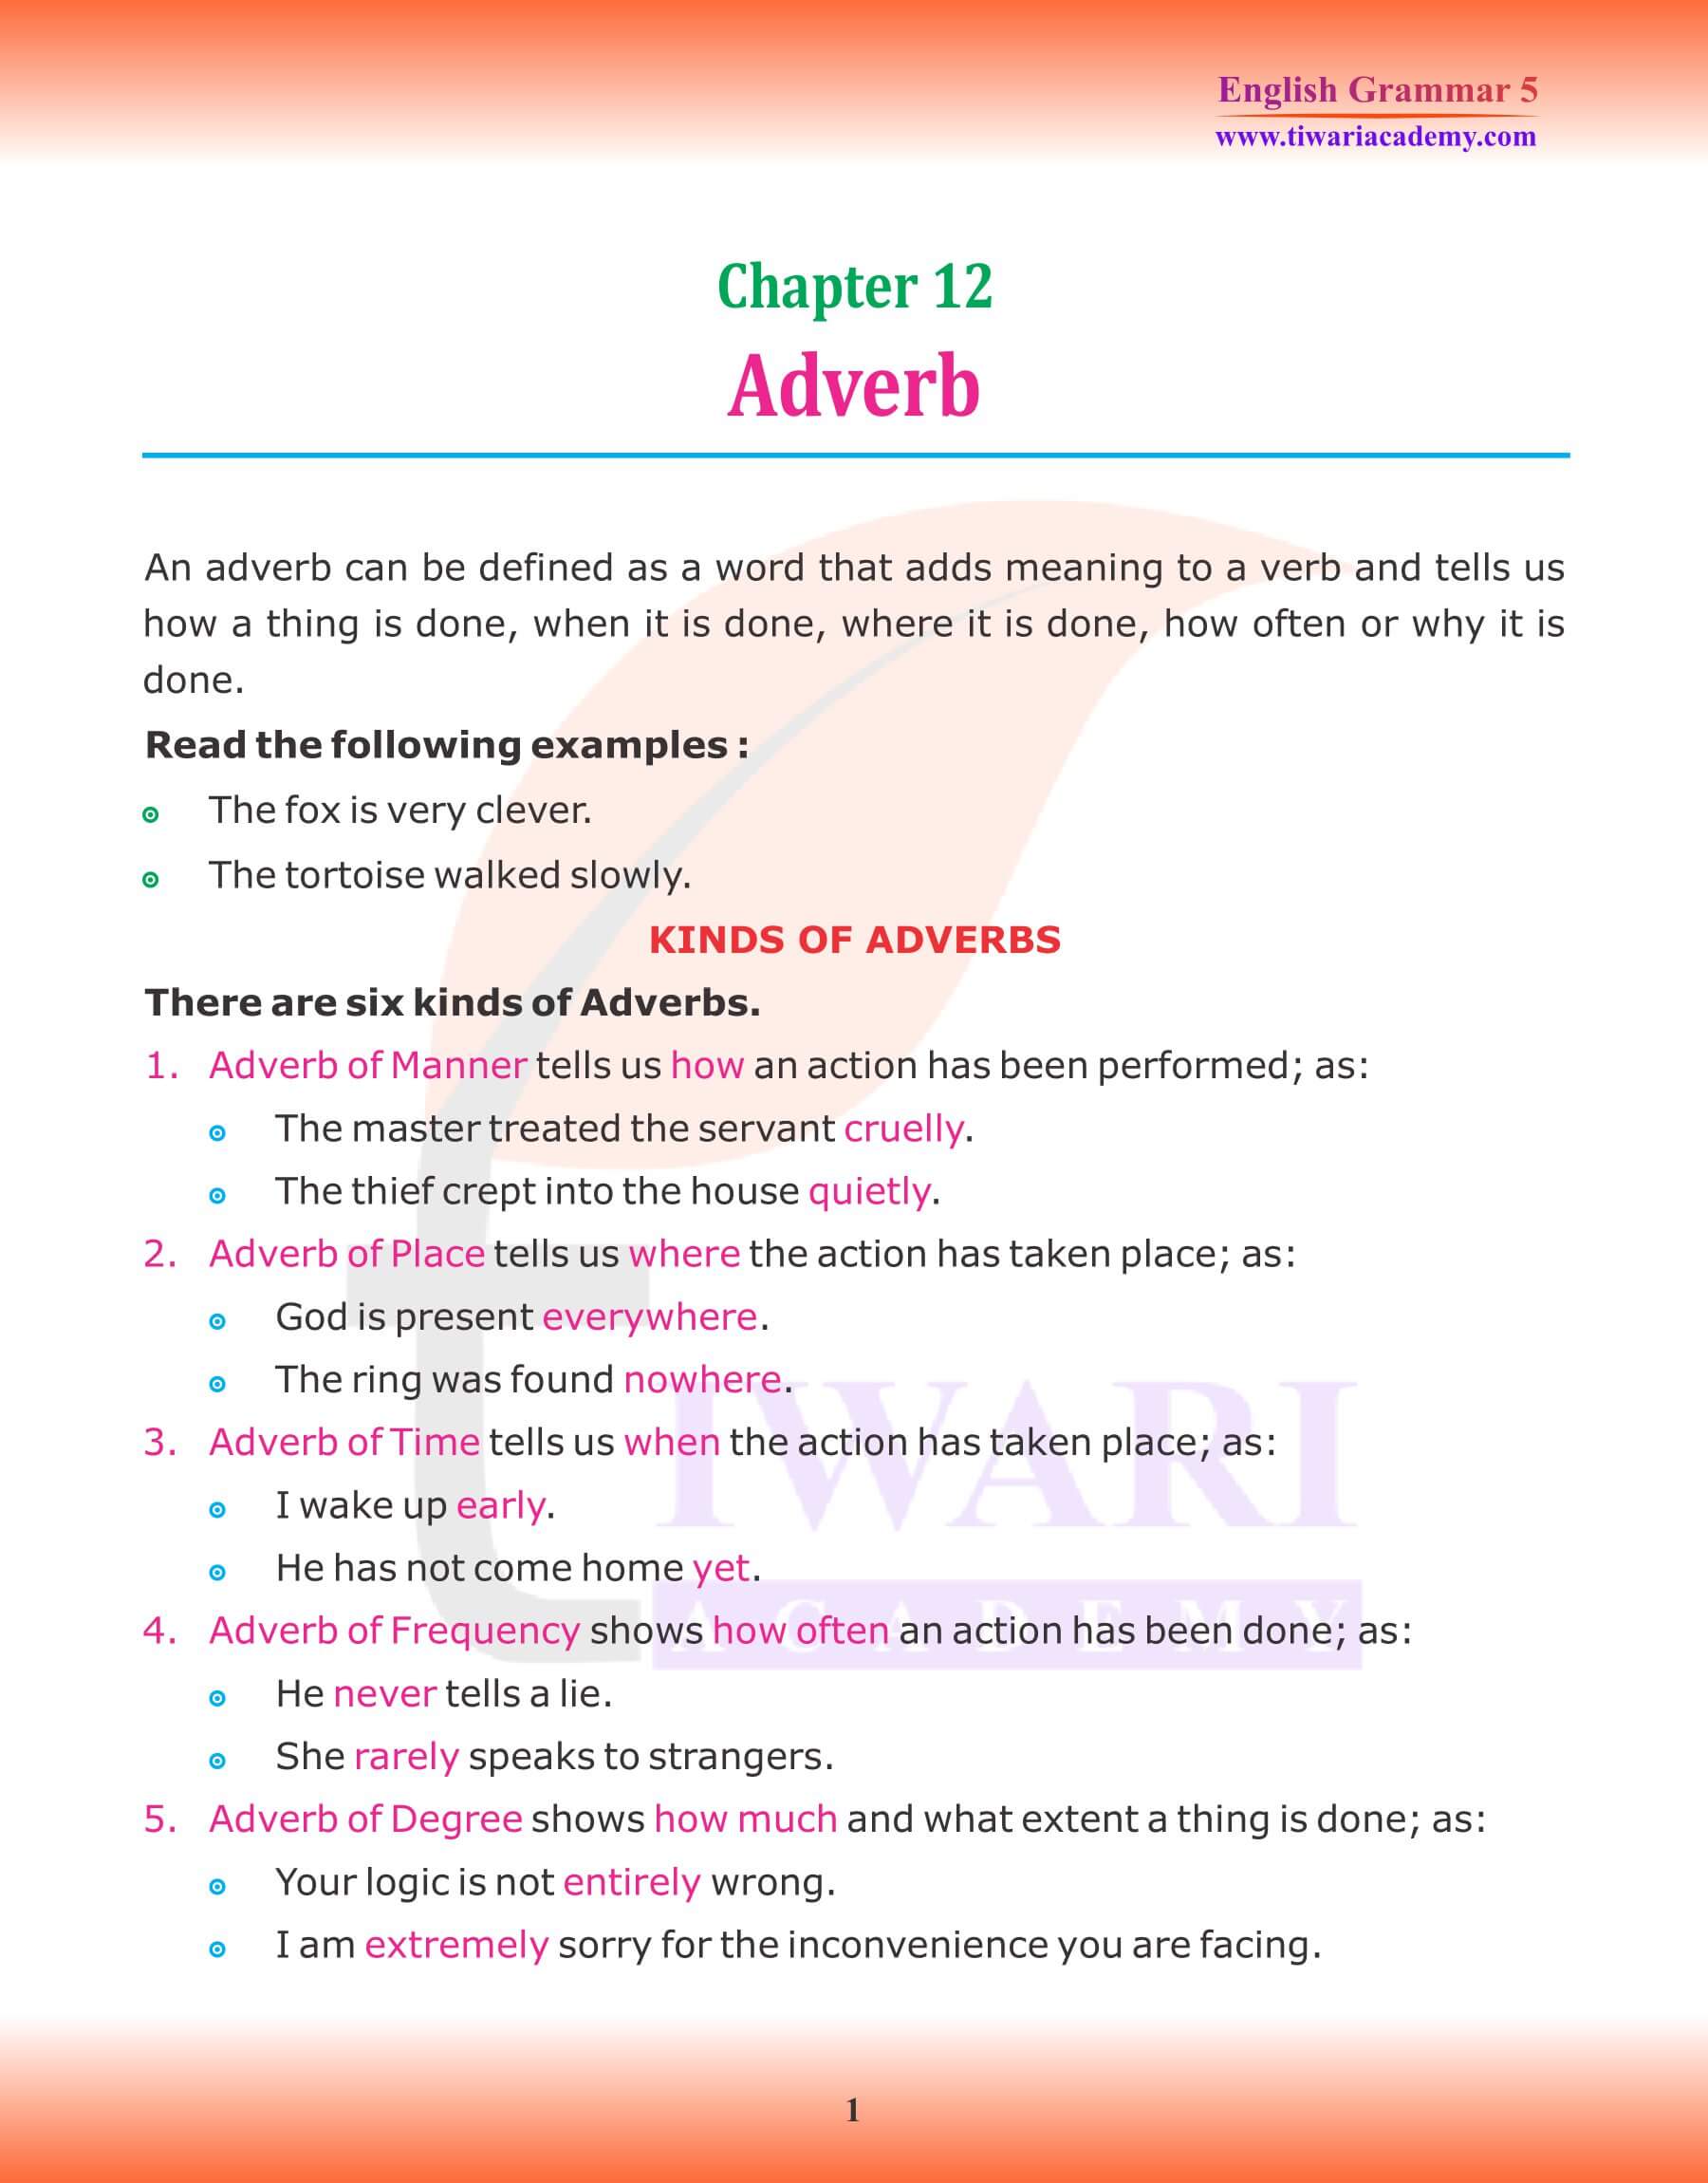 Class 5 English Grammar Chapter 12 Type of Adverbs